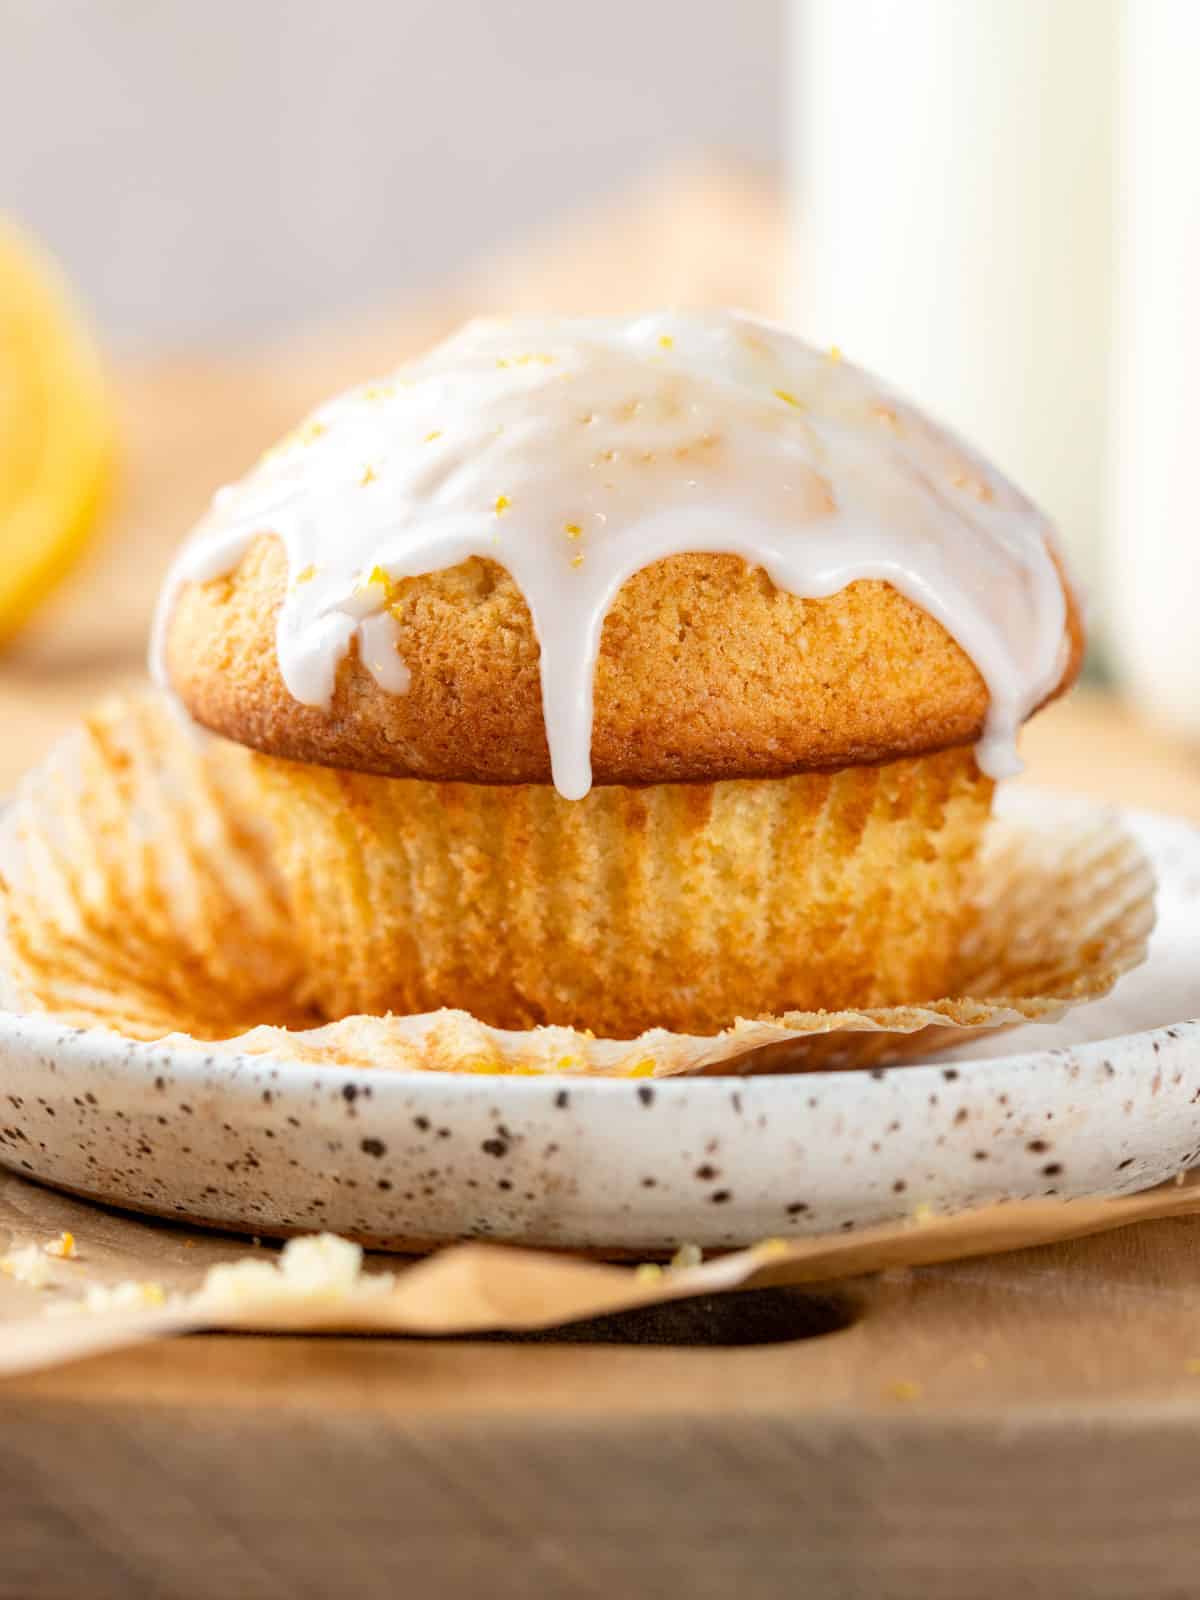 A bakery style muffin on a plate with lemon glaze dripping off the top.